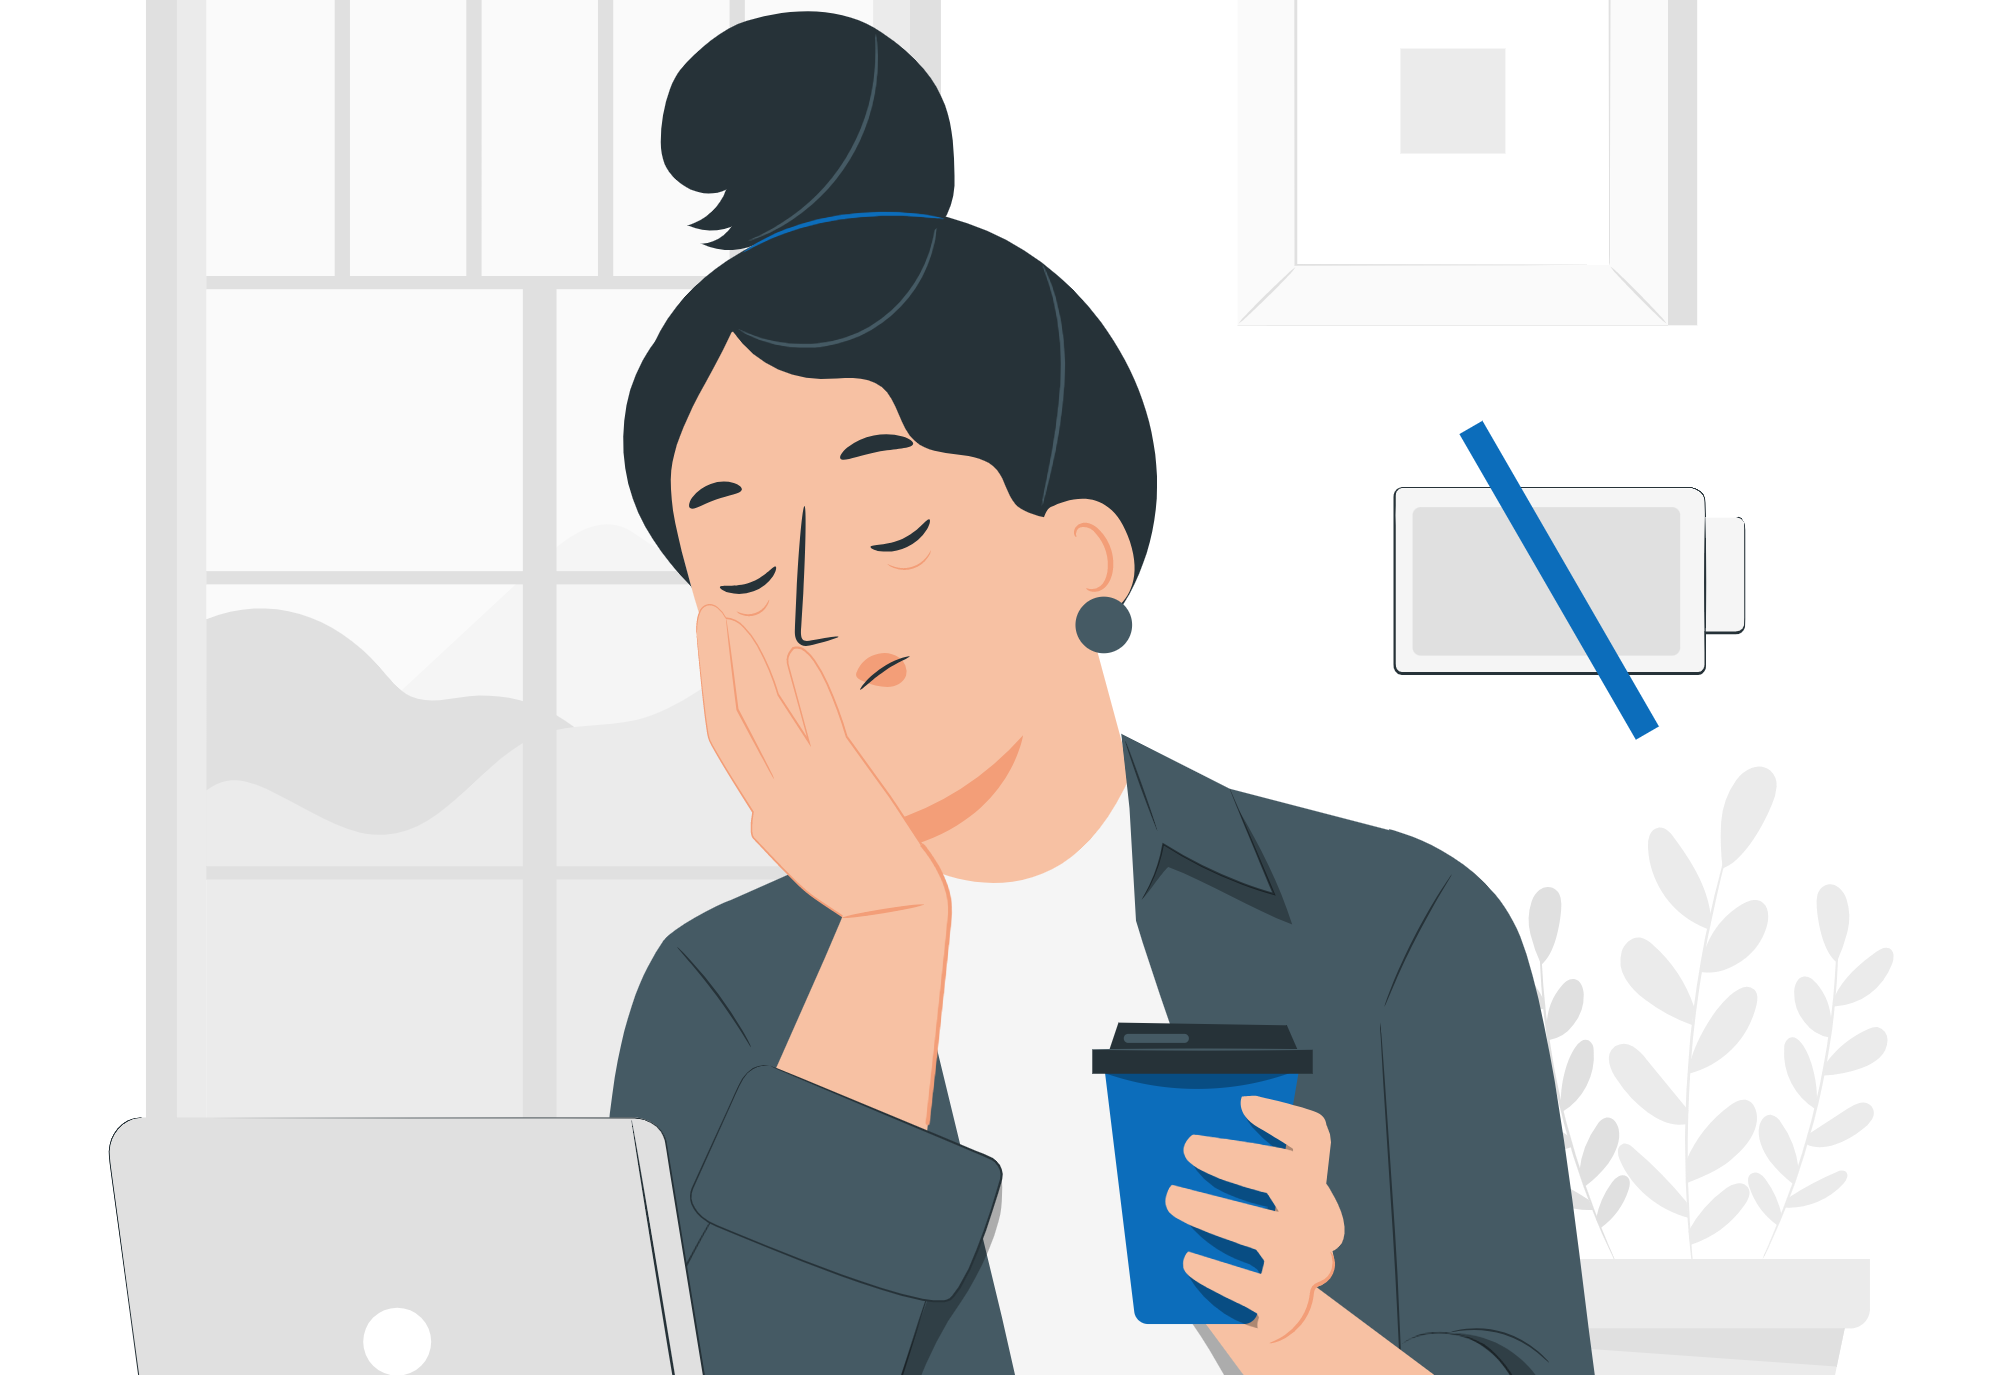 illustration to depict quiet quitting: a person holding a coffee in front of a laptop and looking tired with a low battery icon